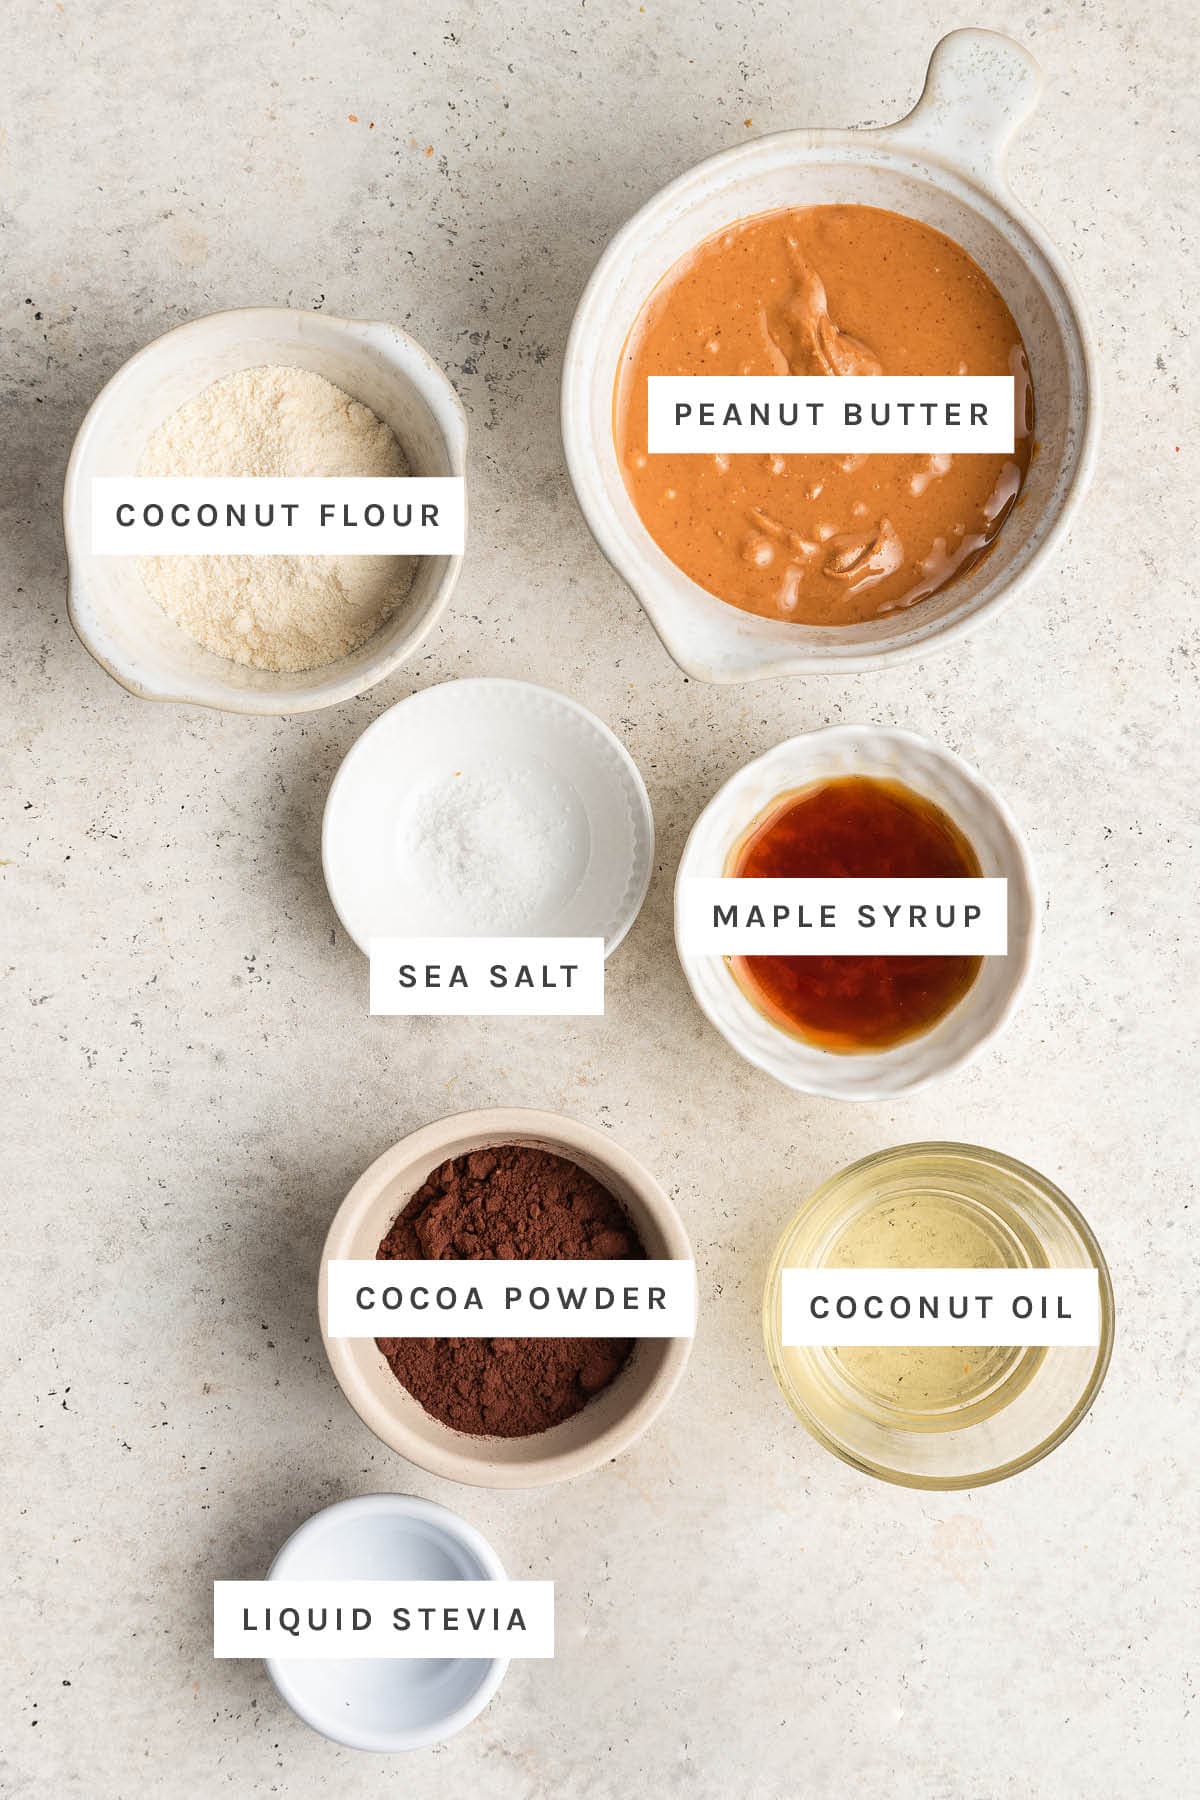 Ingredients measured out to make Healthy Peanut Butter Eggs: coconut flour, peanut butter, sea salt, maple syrup, cocoa powder, coconut oil and liquid stevia.